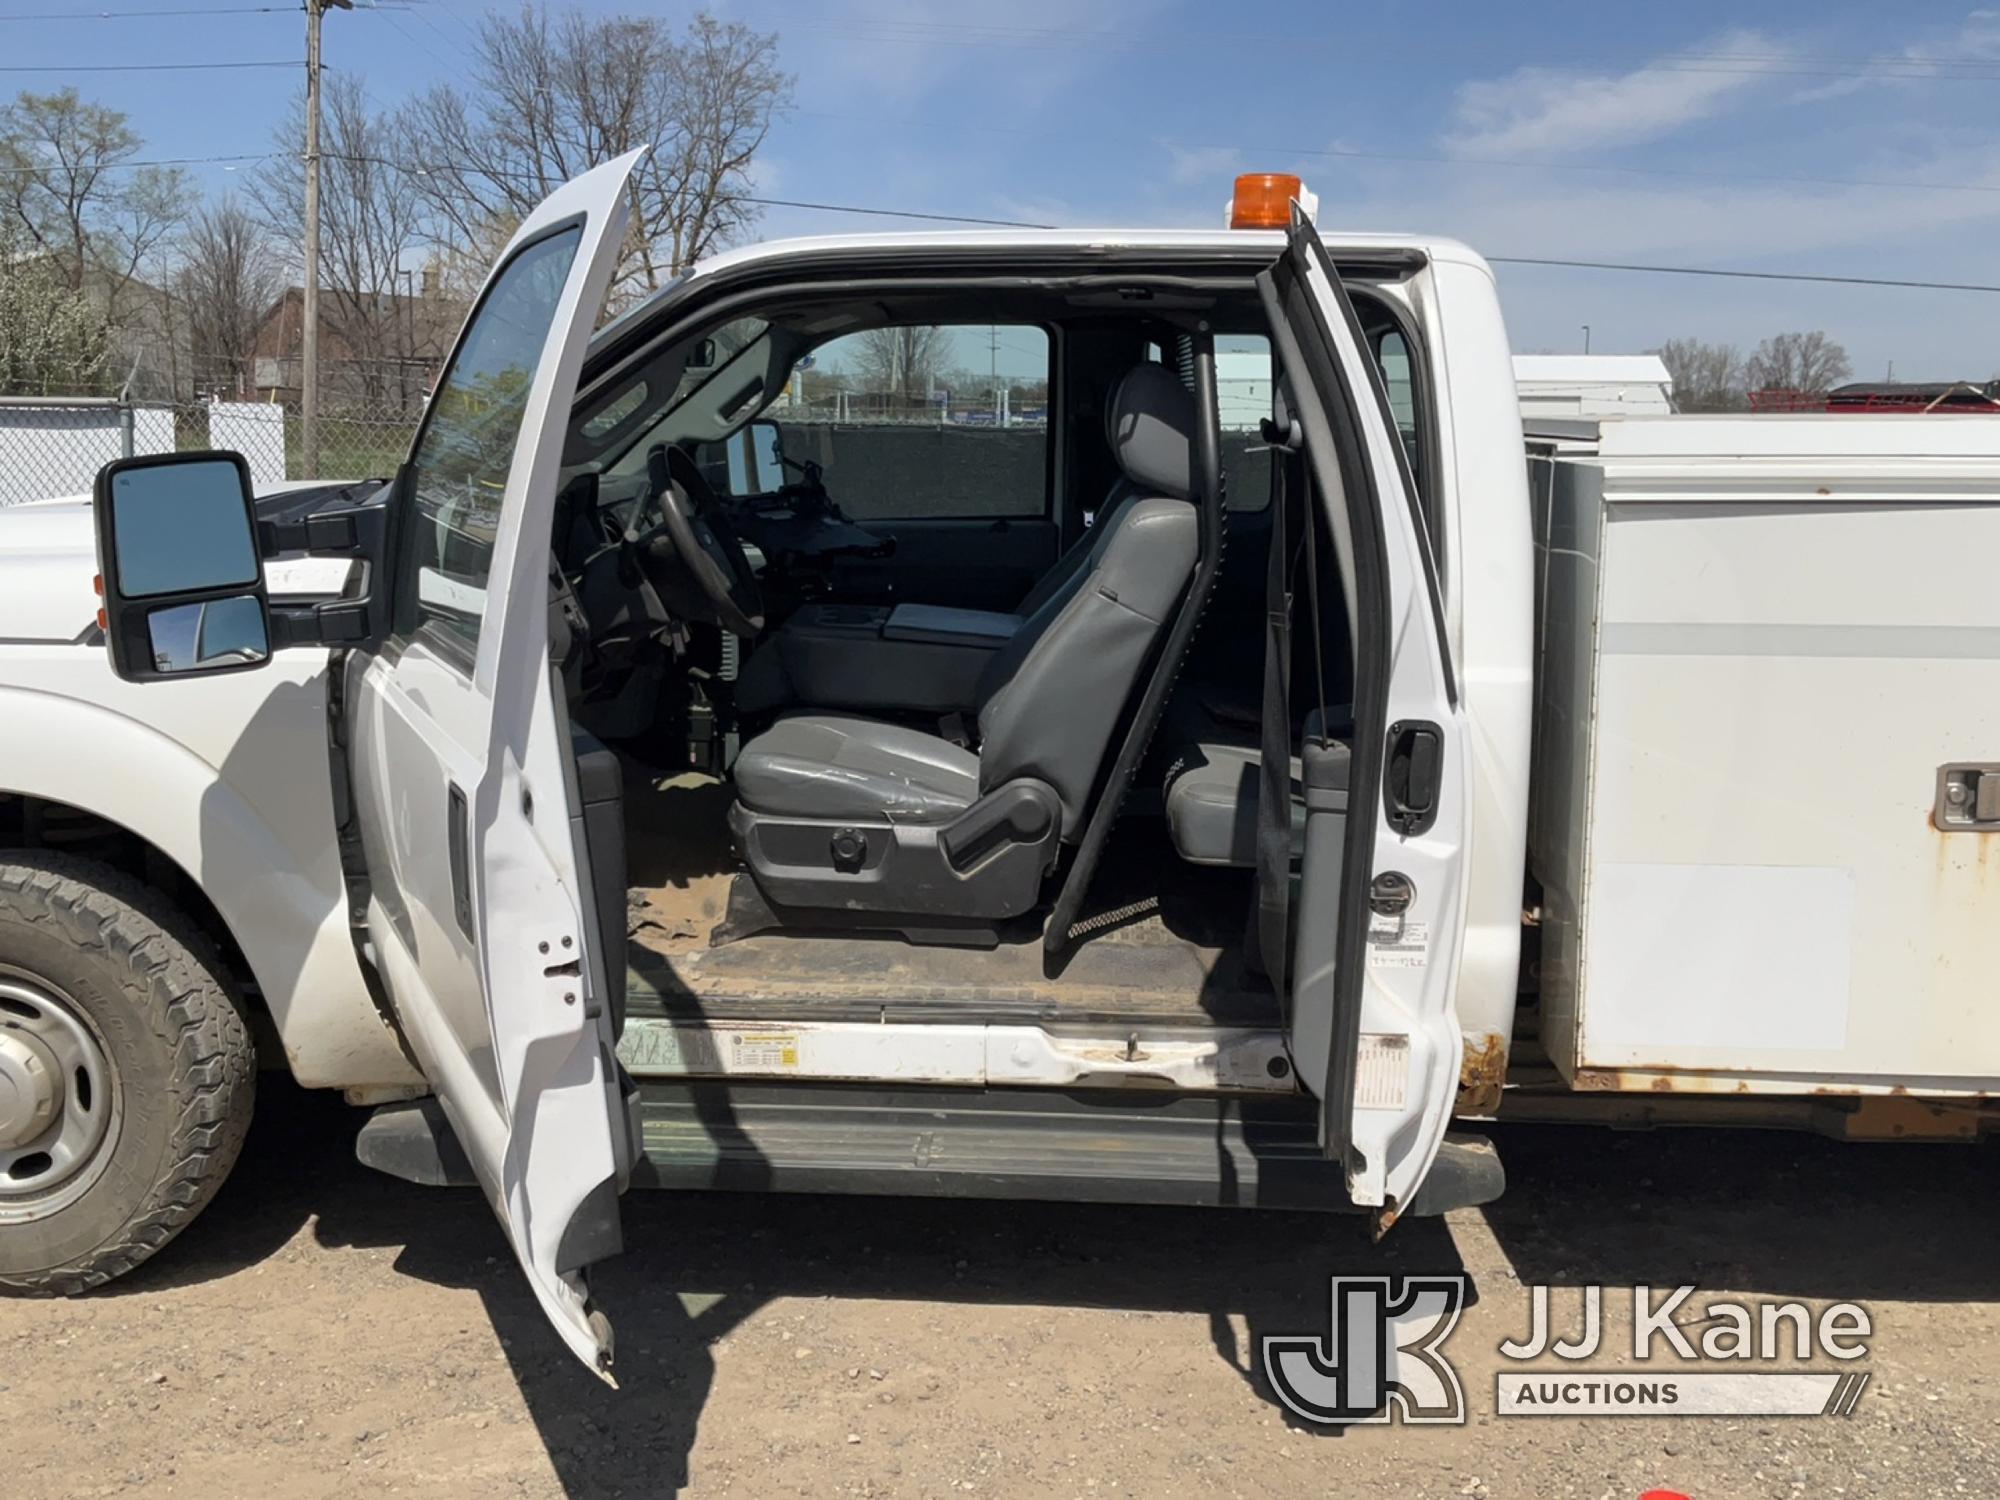 (Charlotte, MI) 2013 Ford F250 Extended-Cab Service Truck Runs, Moves, Jump To Start, Rust, Bad Star